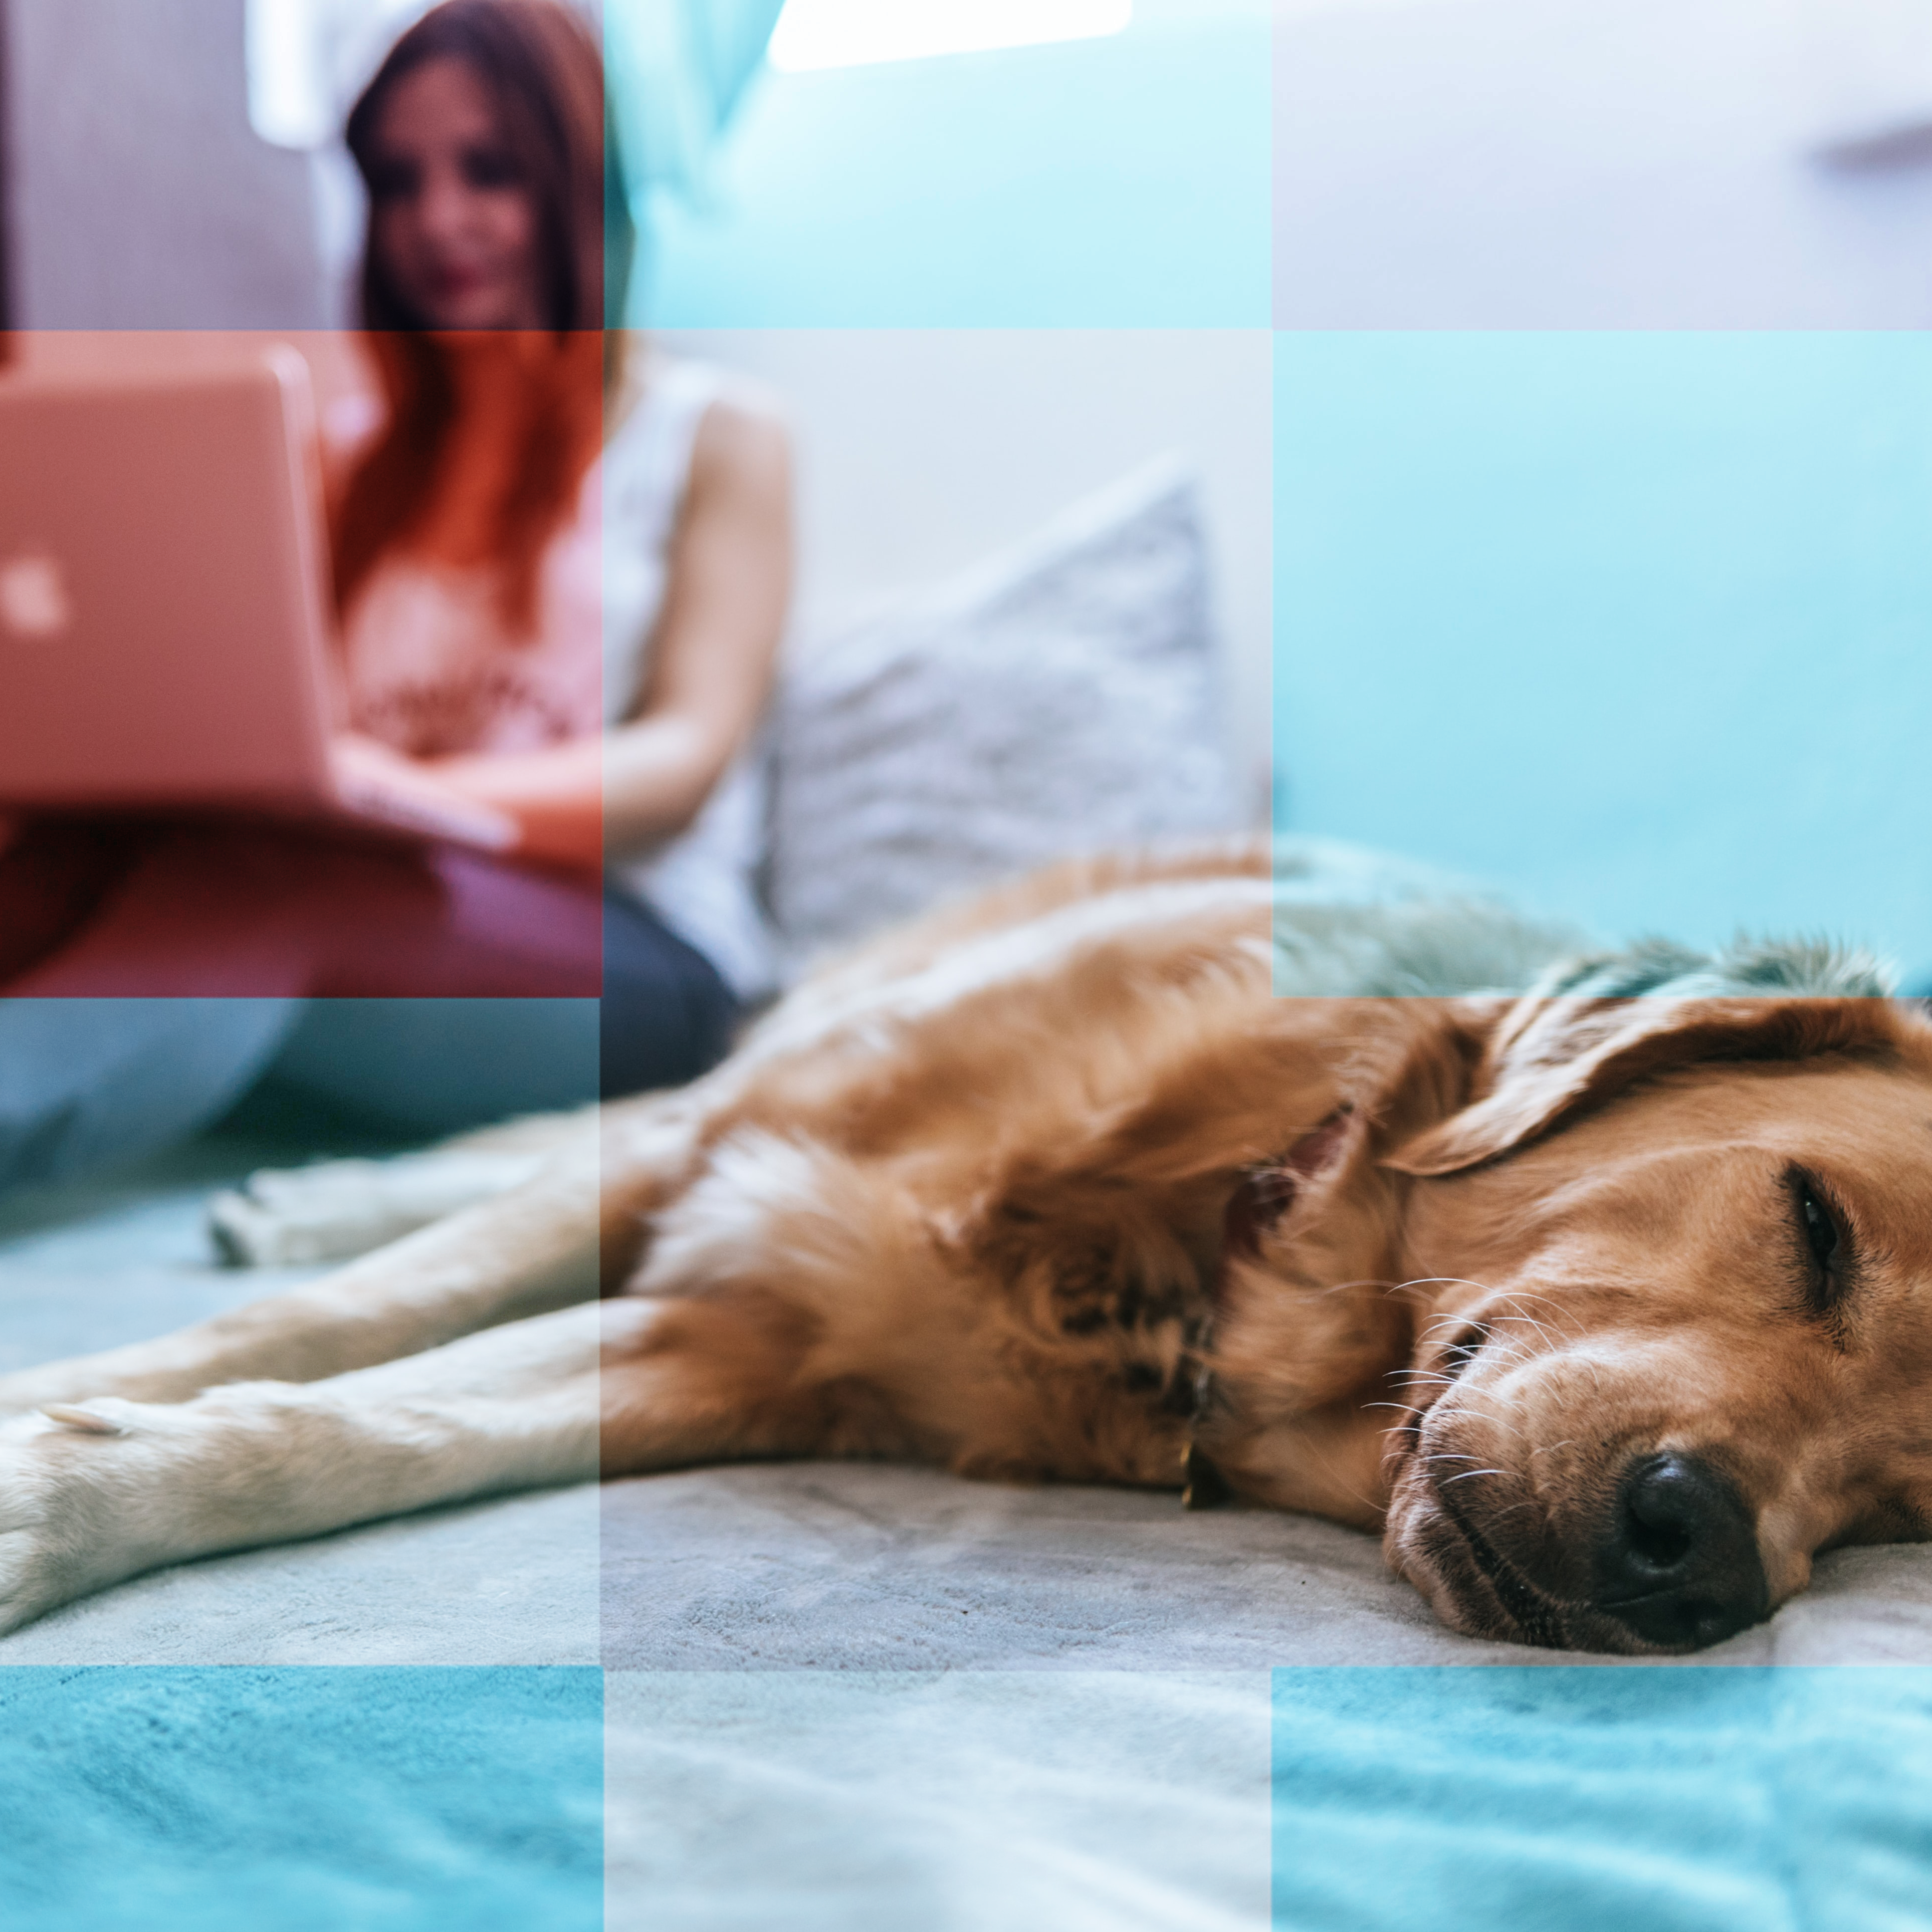 Dog lying on a bed, in the background a woman uses a laptop